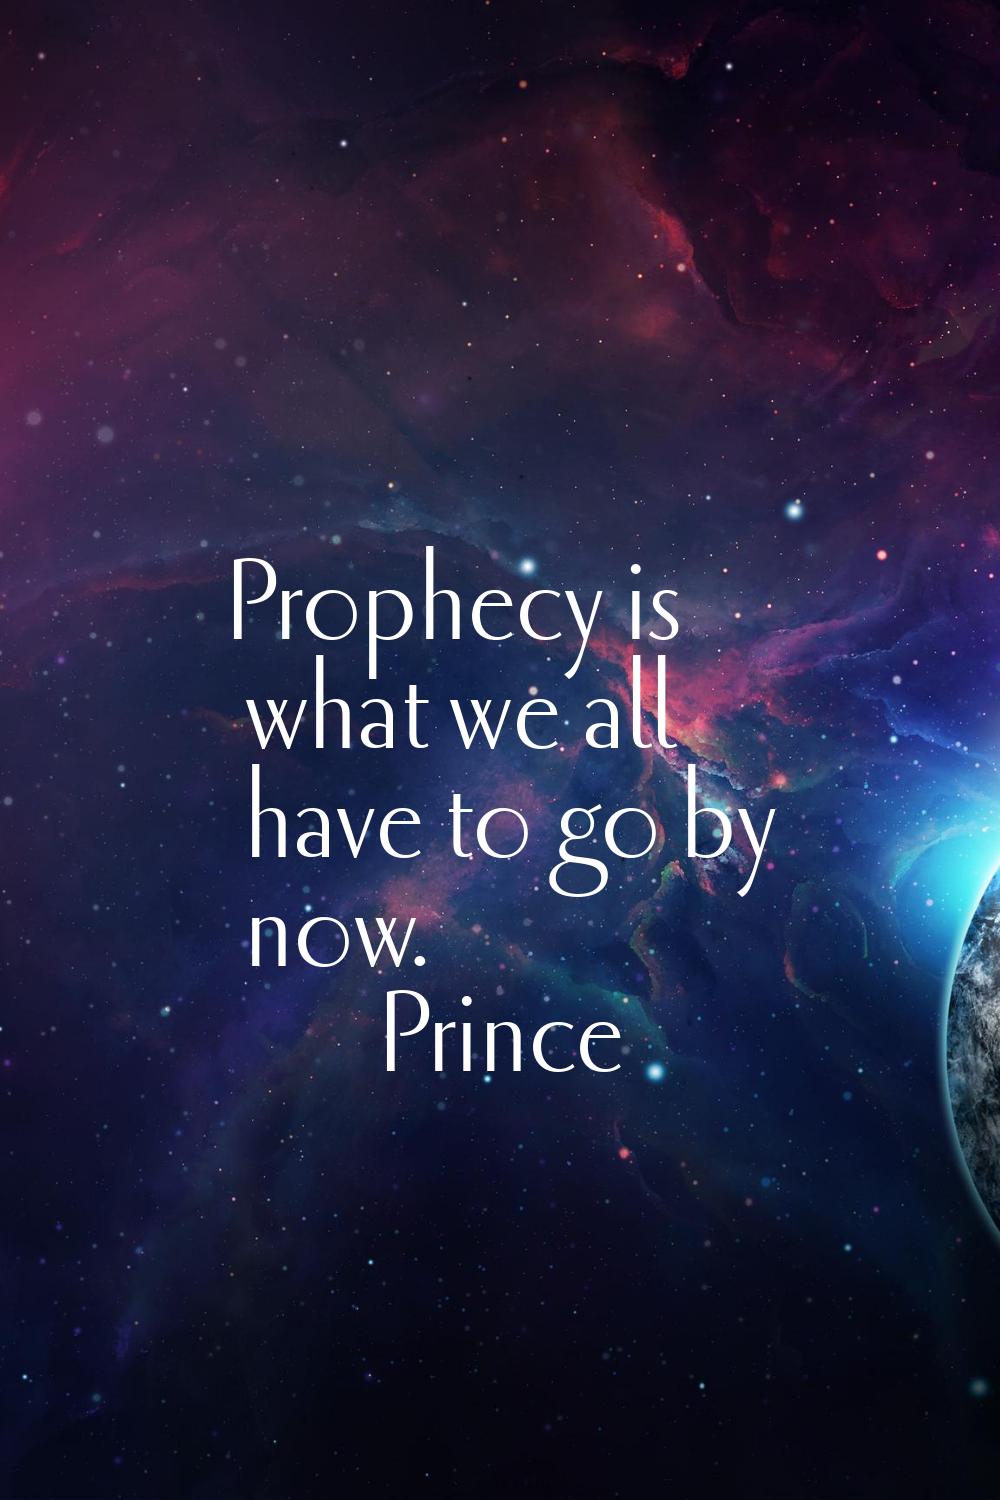 Prophecy is what we all have to go by now.